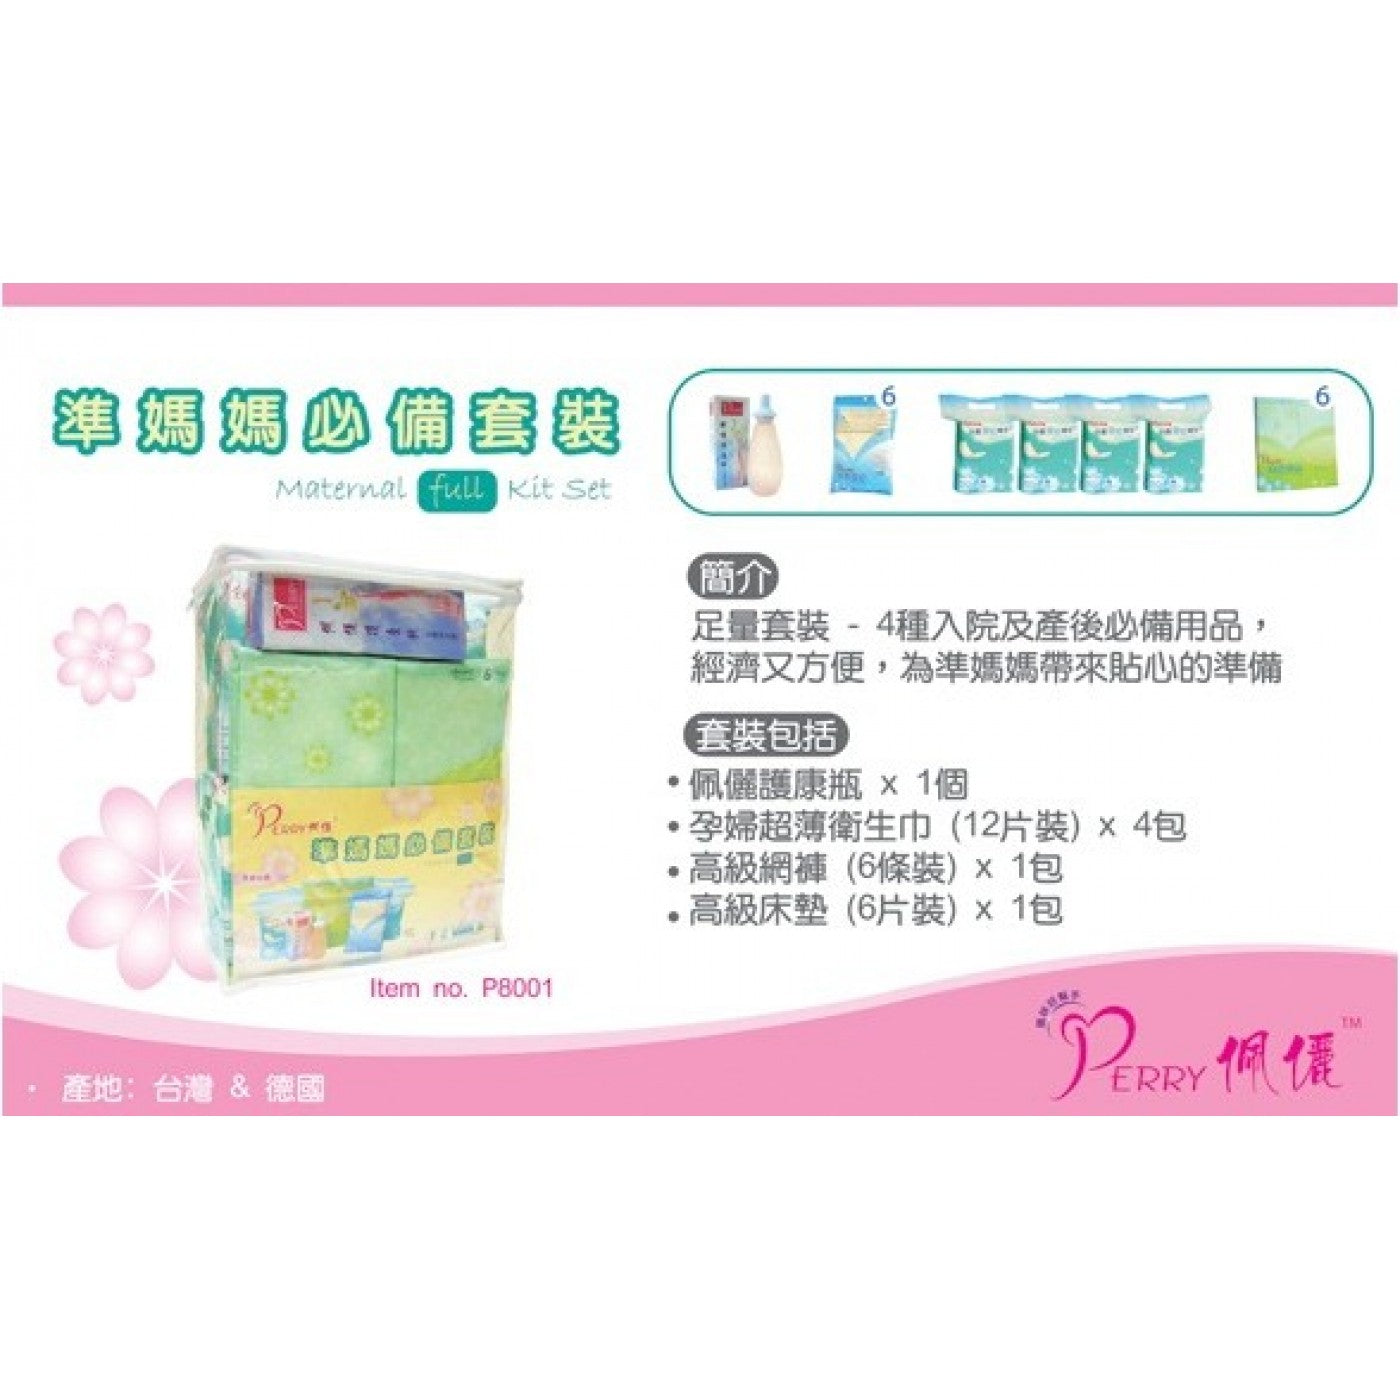 Perry Maternal Full Kit Pregnancy Delivery Care Set